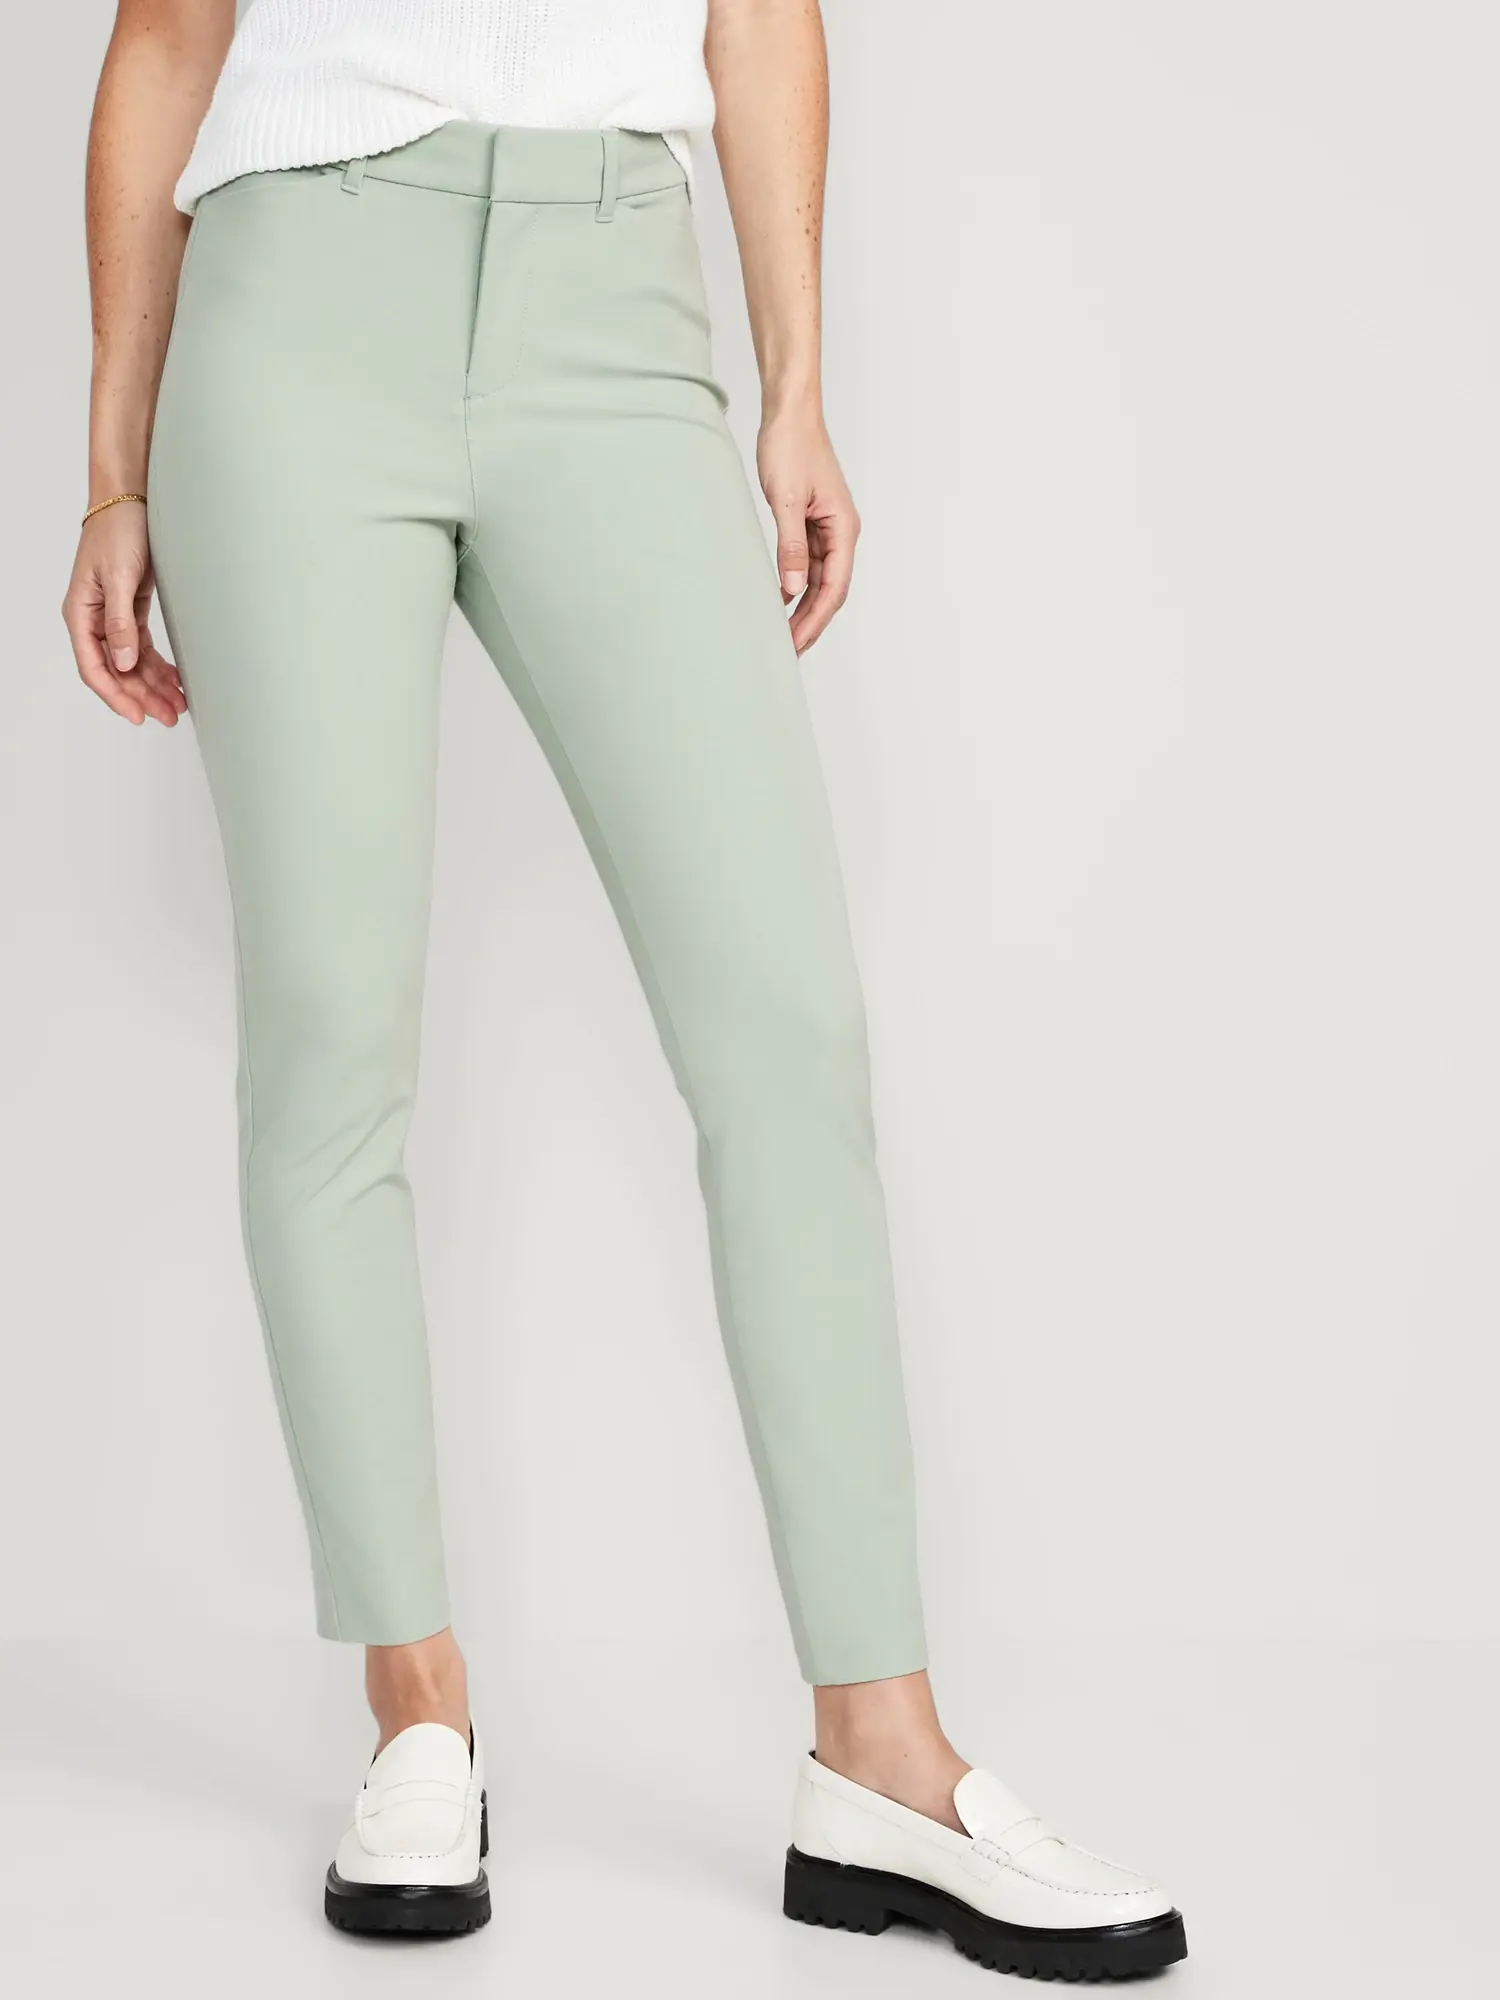 Old Navy High-Waisted Pixie Skinny Ankle Pants for Women green. 1